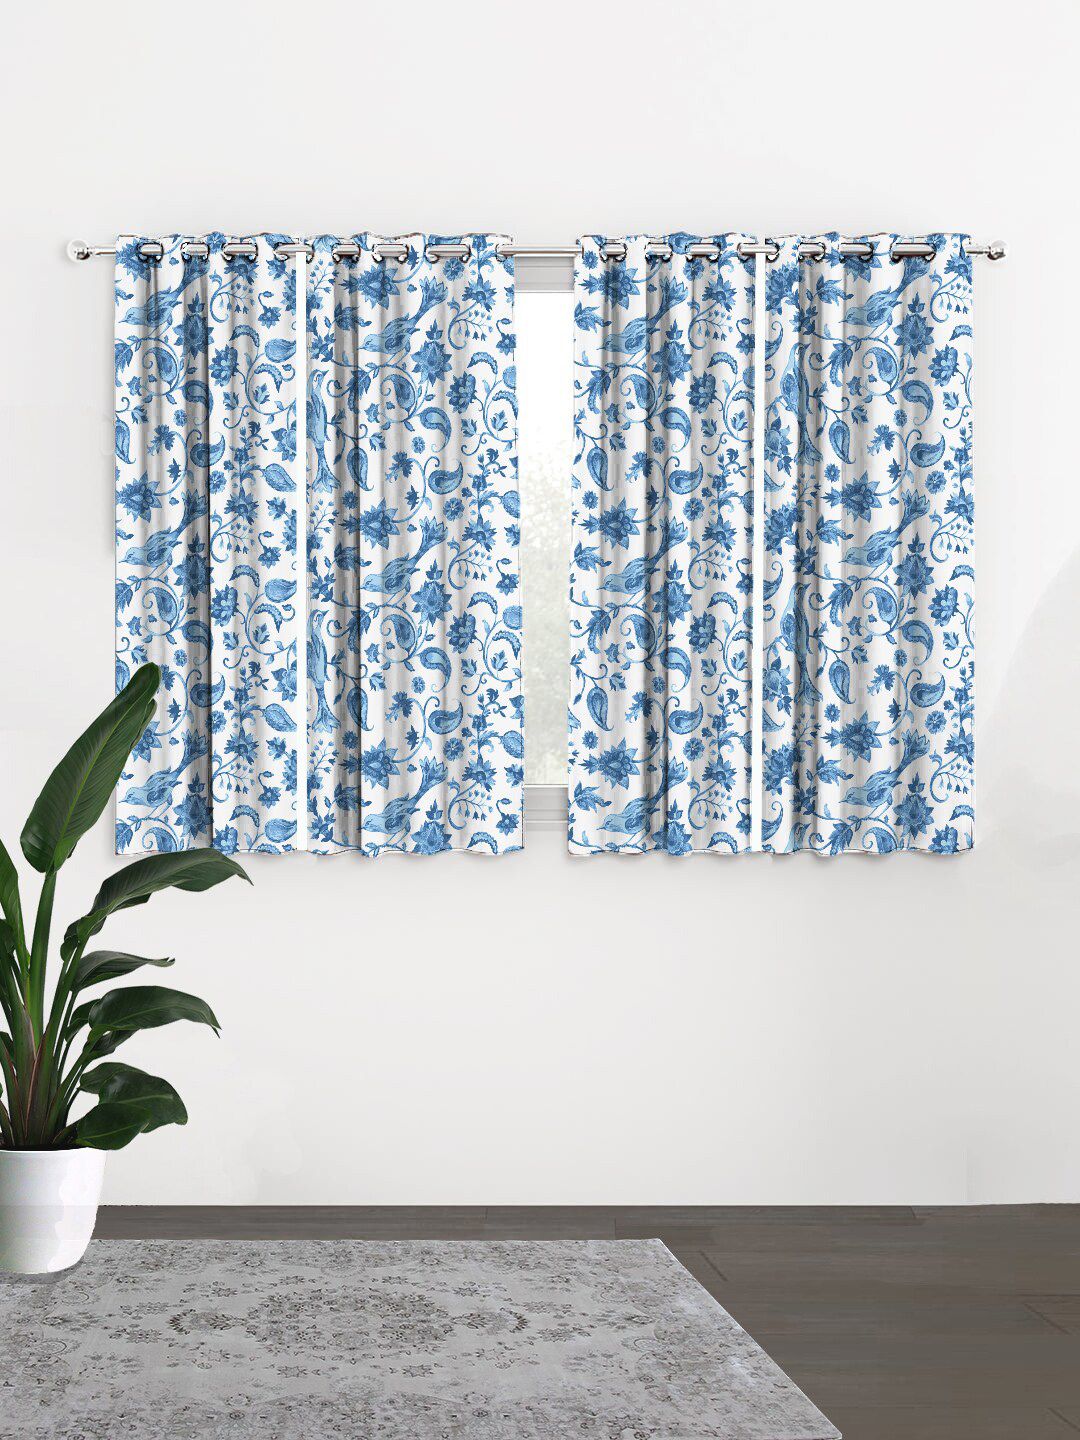 HOUZZCODE Set Of 4 White & Blue Floral Black Out Window Curtains Price in India